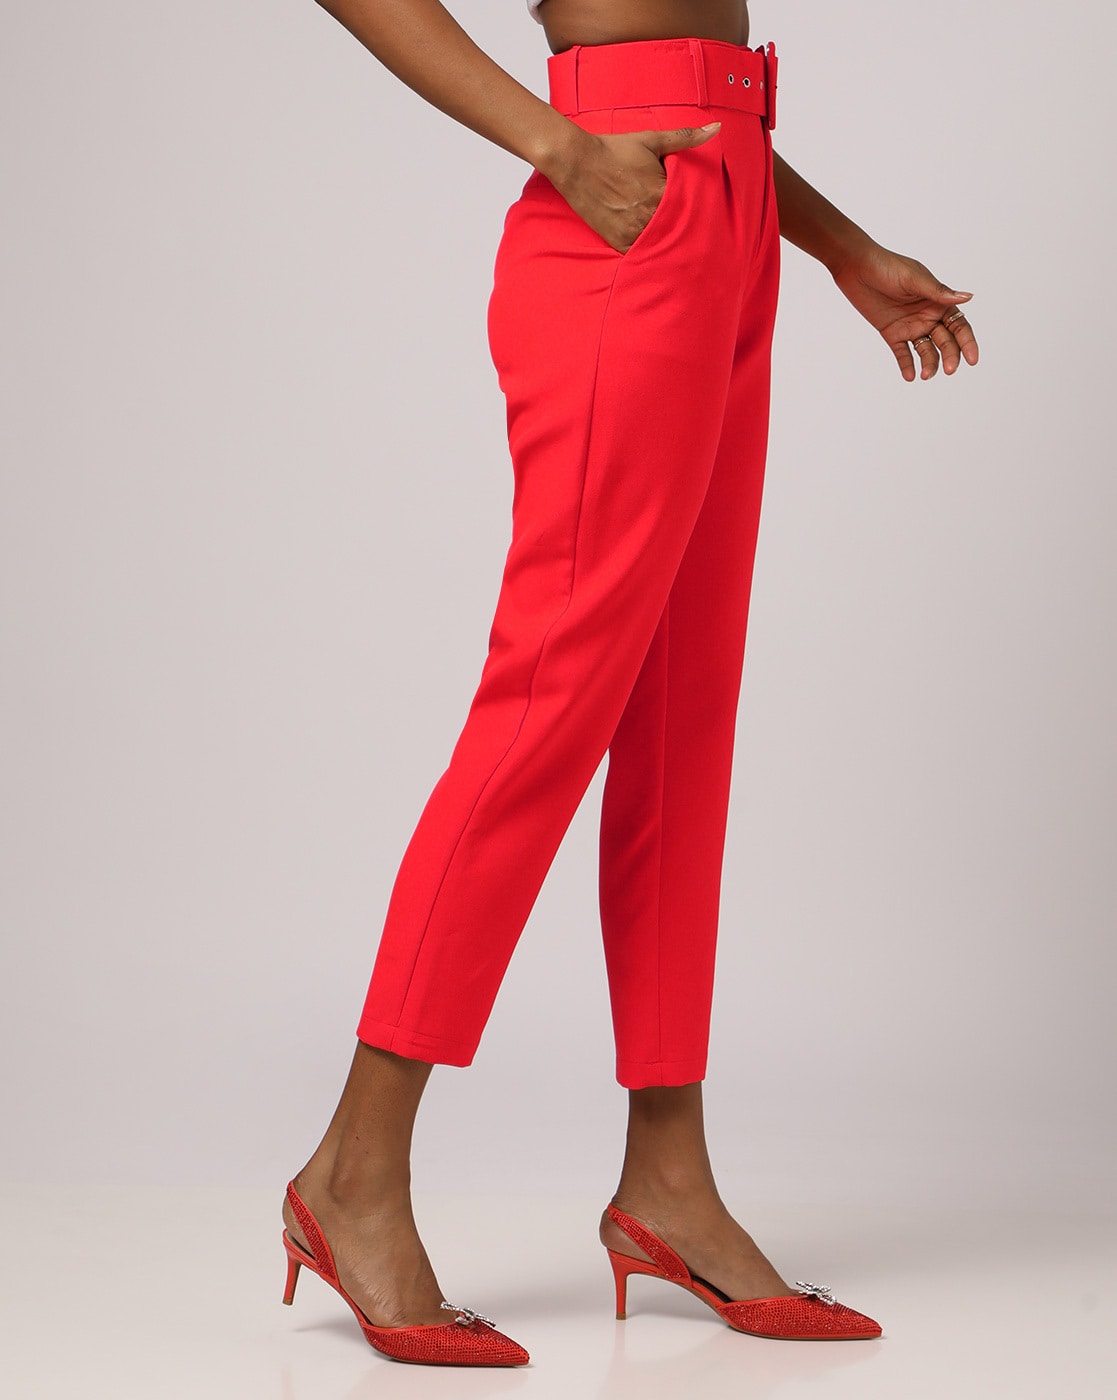 Buy Stylish Red Cigarette Pants Collection At Best Prices Online